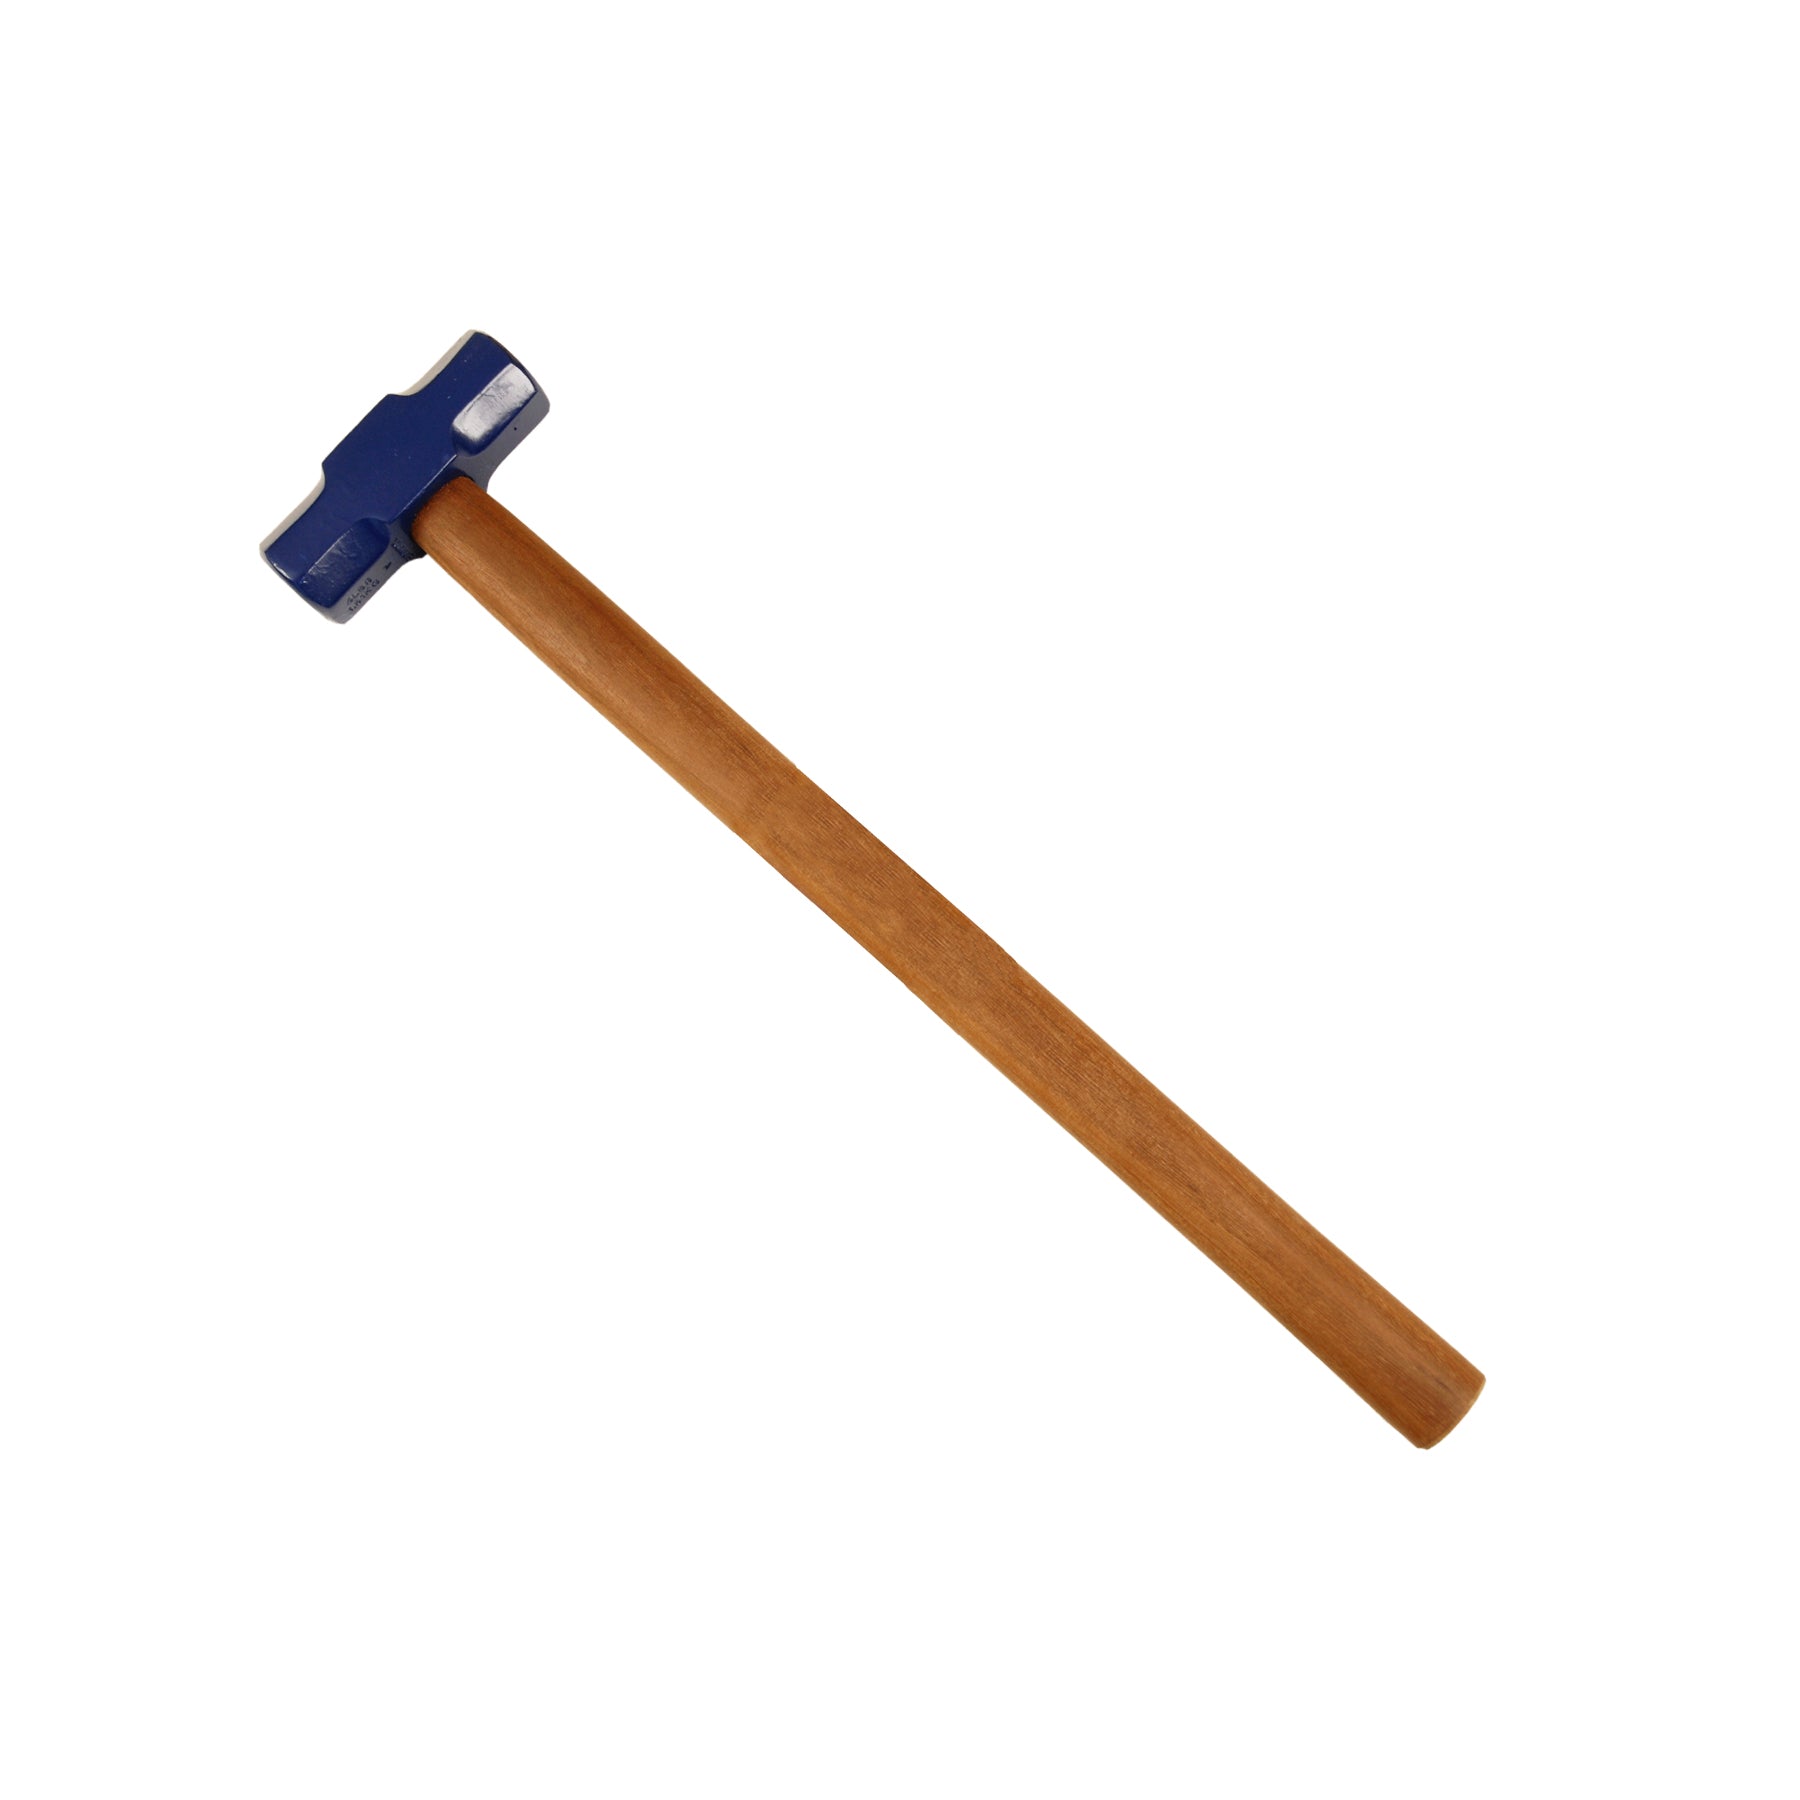 4lb Sledge Hammer with Hardwood Handle 5HSH04 by Mumme